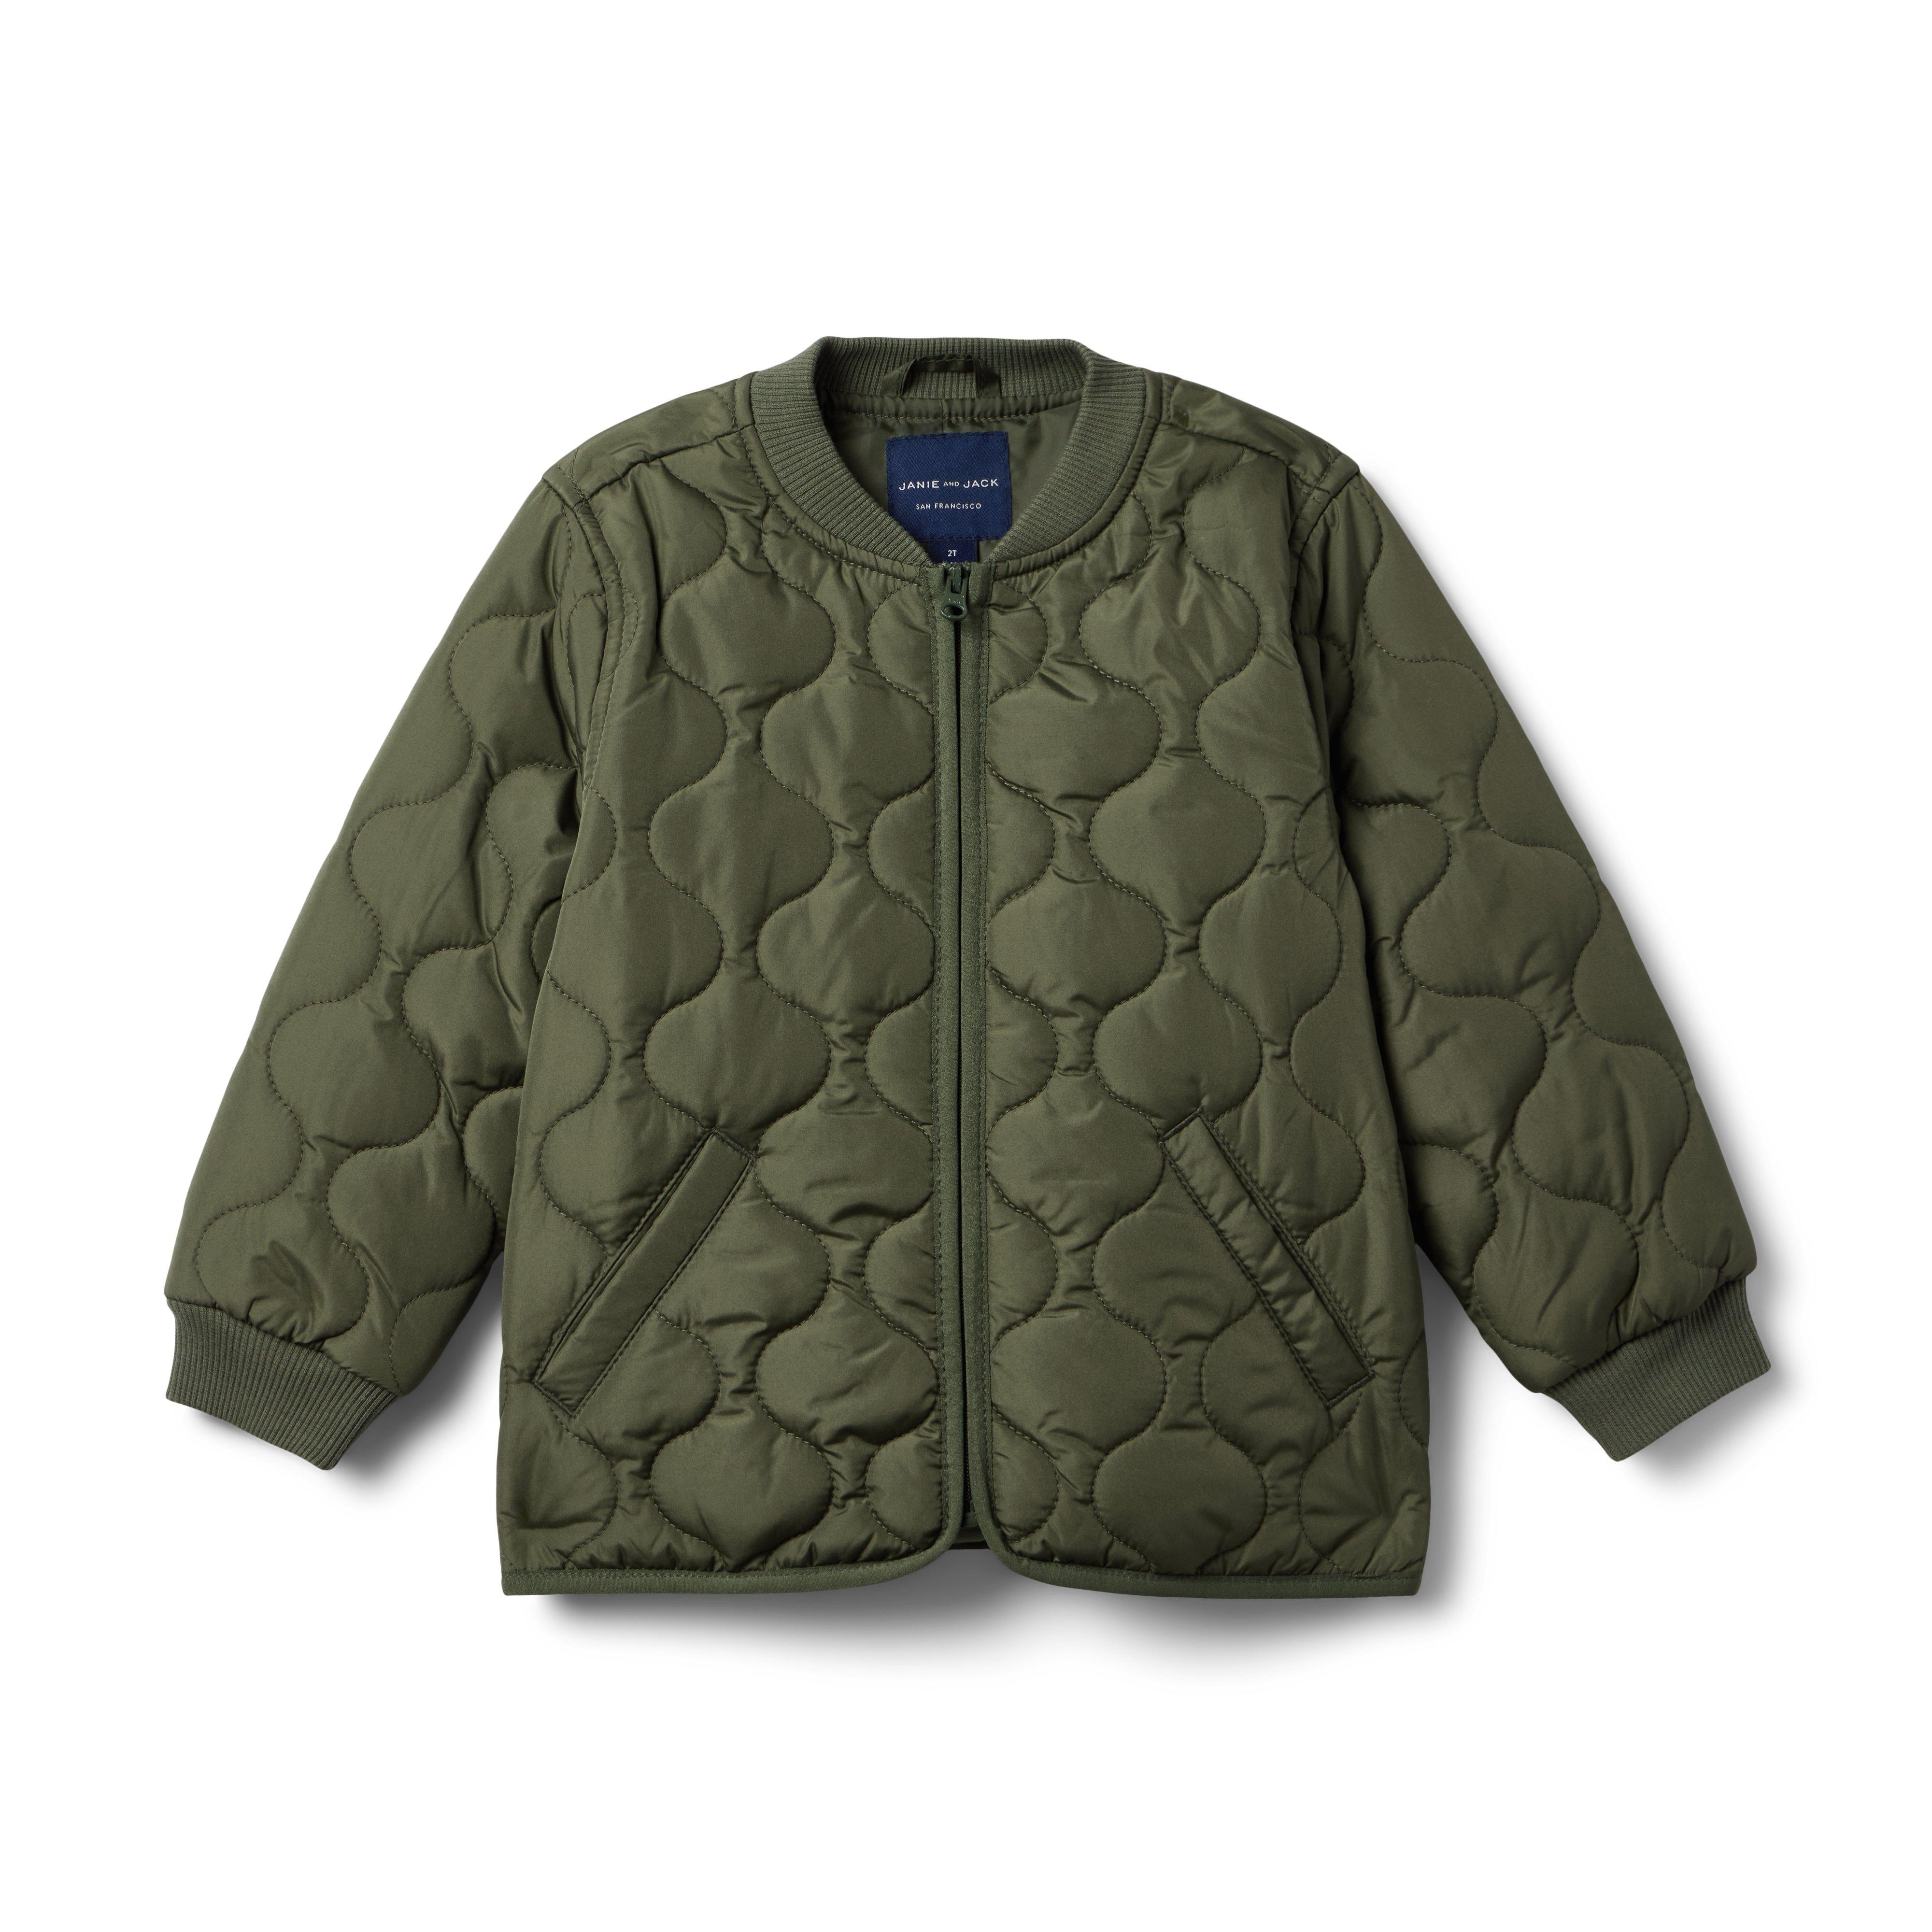 The Quilted Bomber Jacket